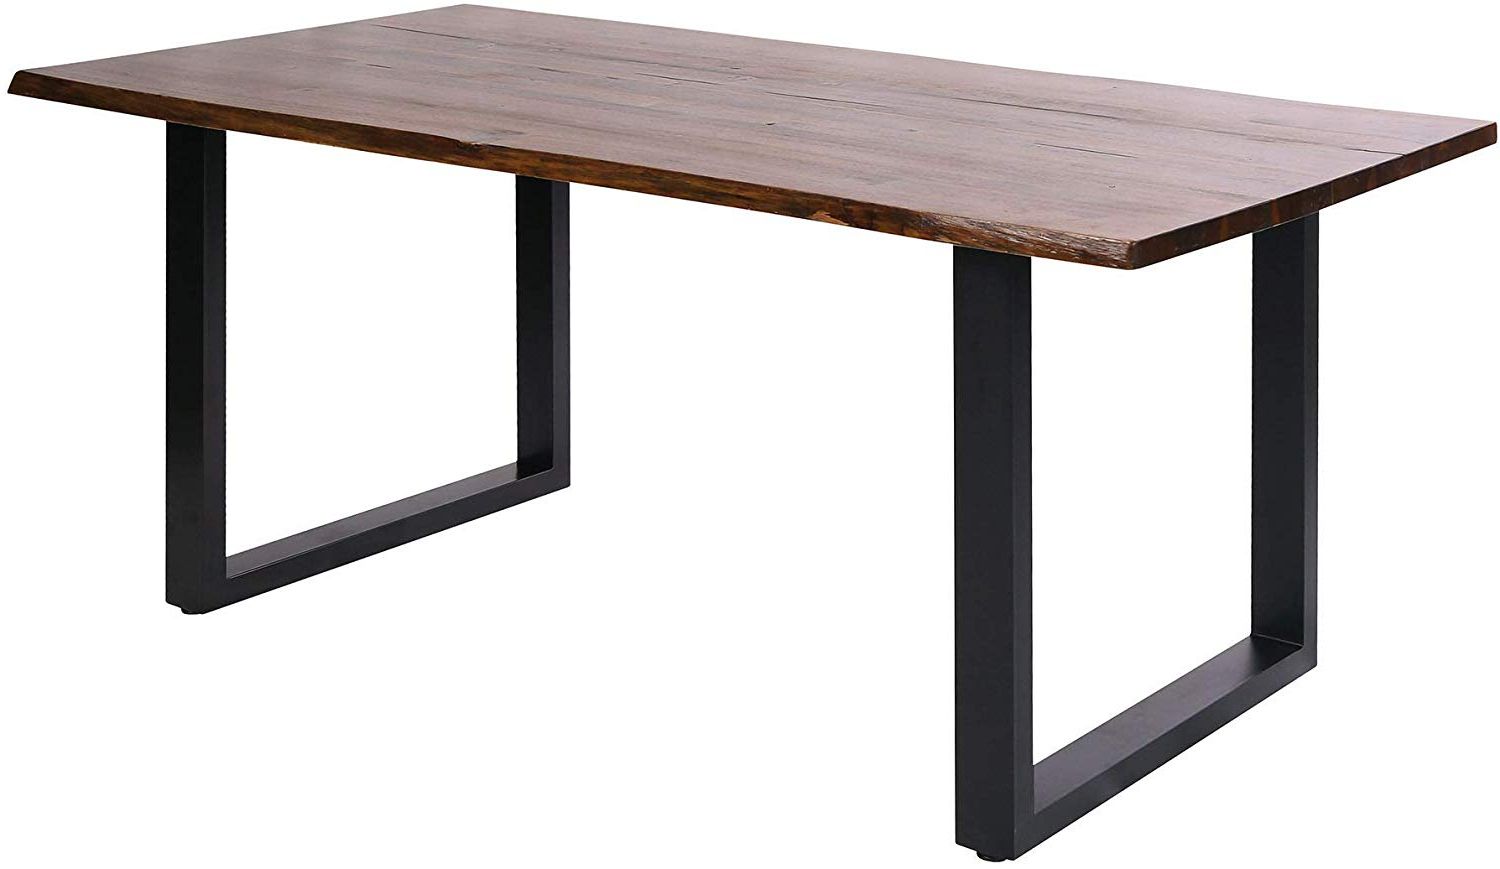 Acacia Dining Tables With Black X Leg Throughout Fashionable Amazon: Living Edge Dining Table In Natural Stain And (View 13 of 25)